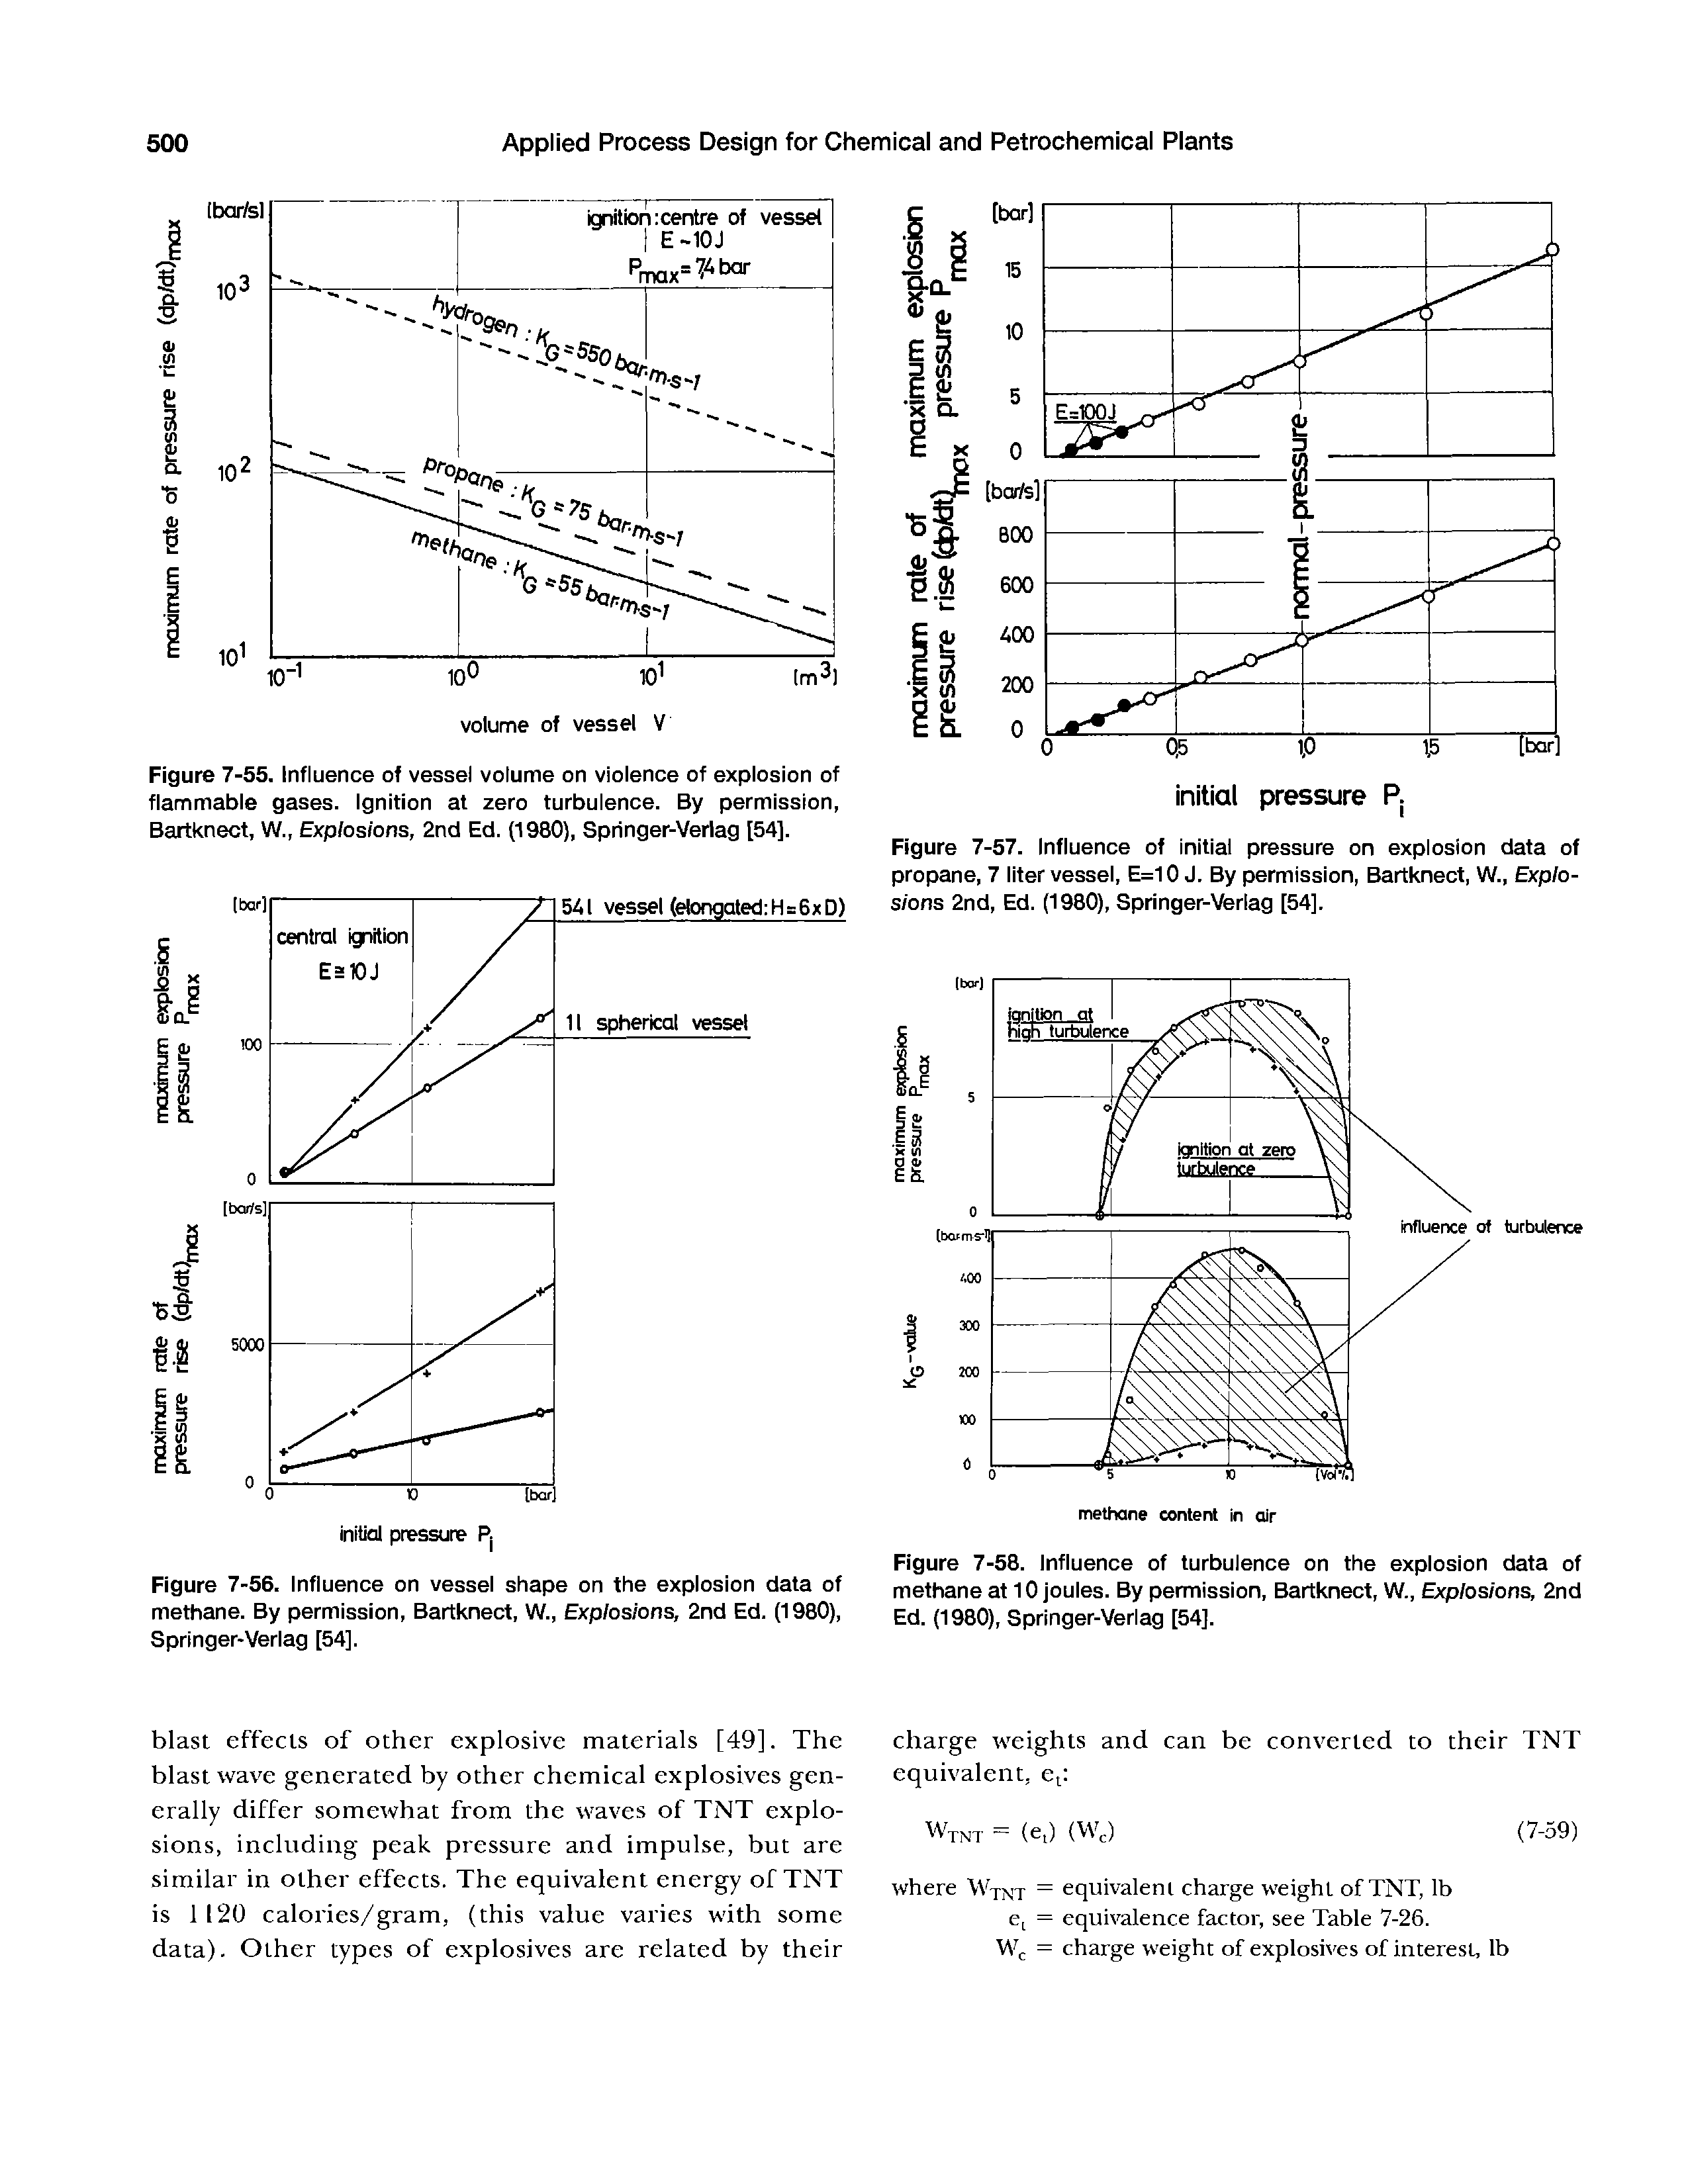 Figure 7-57. Influence of initial pressure on explosion data of propane, 7 liter vessel, E=10 J. By permission, Bartknect, W., Explosions 2nd, Ed. (1980), Springer-Verlag [54].